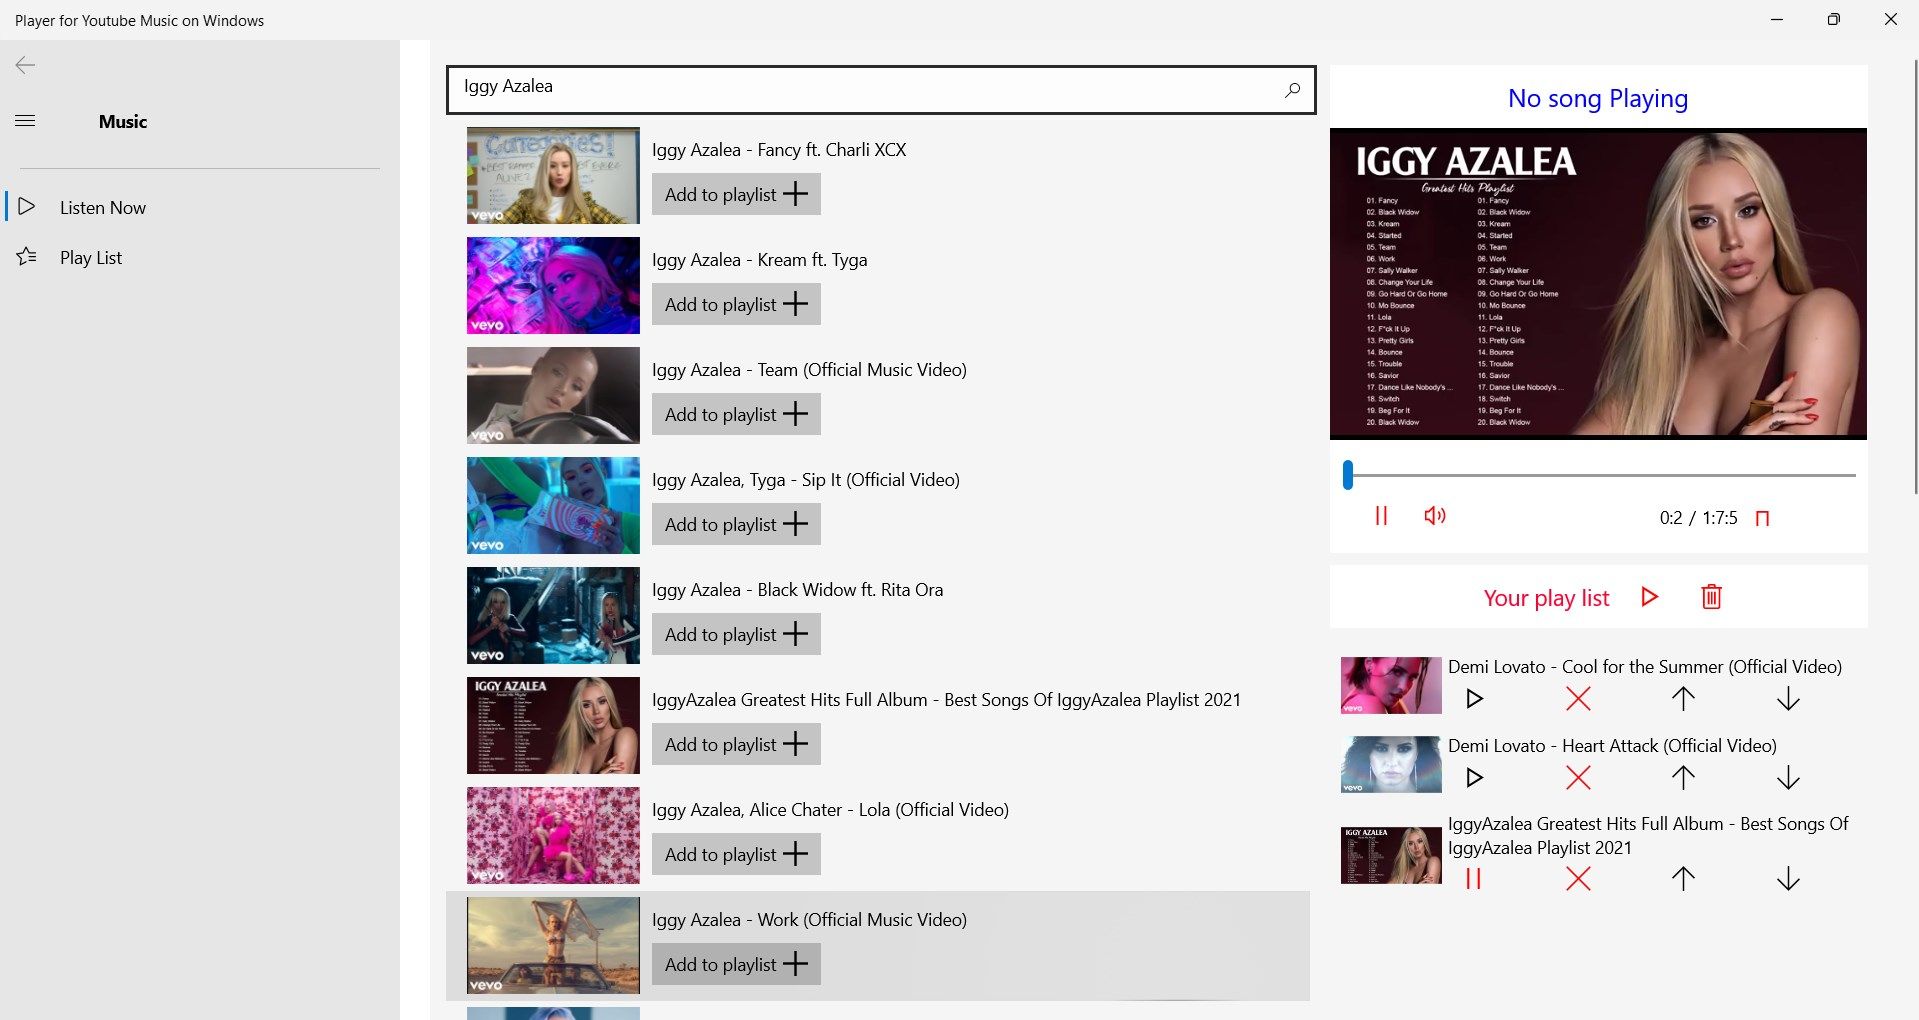 Player for Youtube Music on Windows